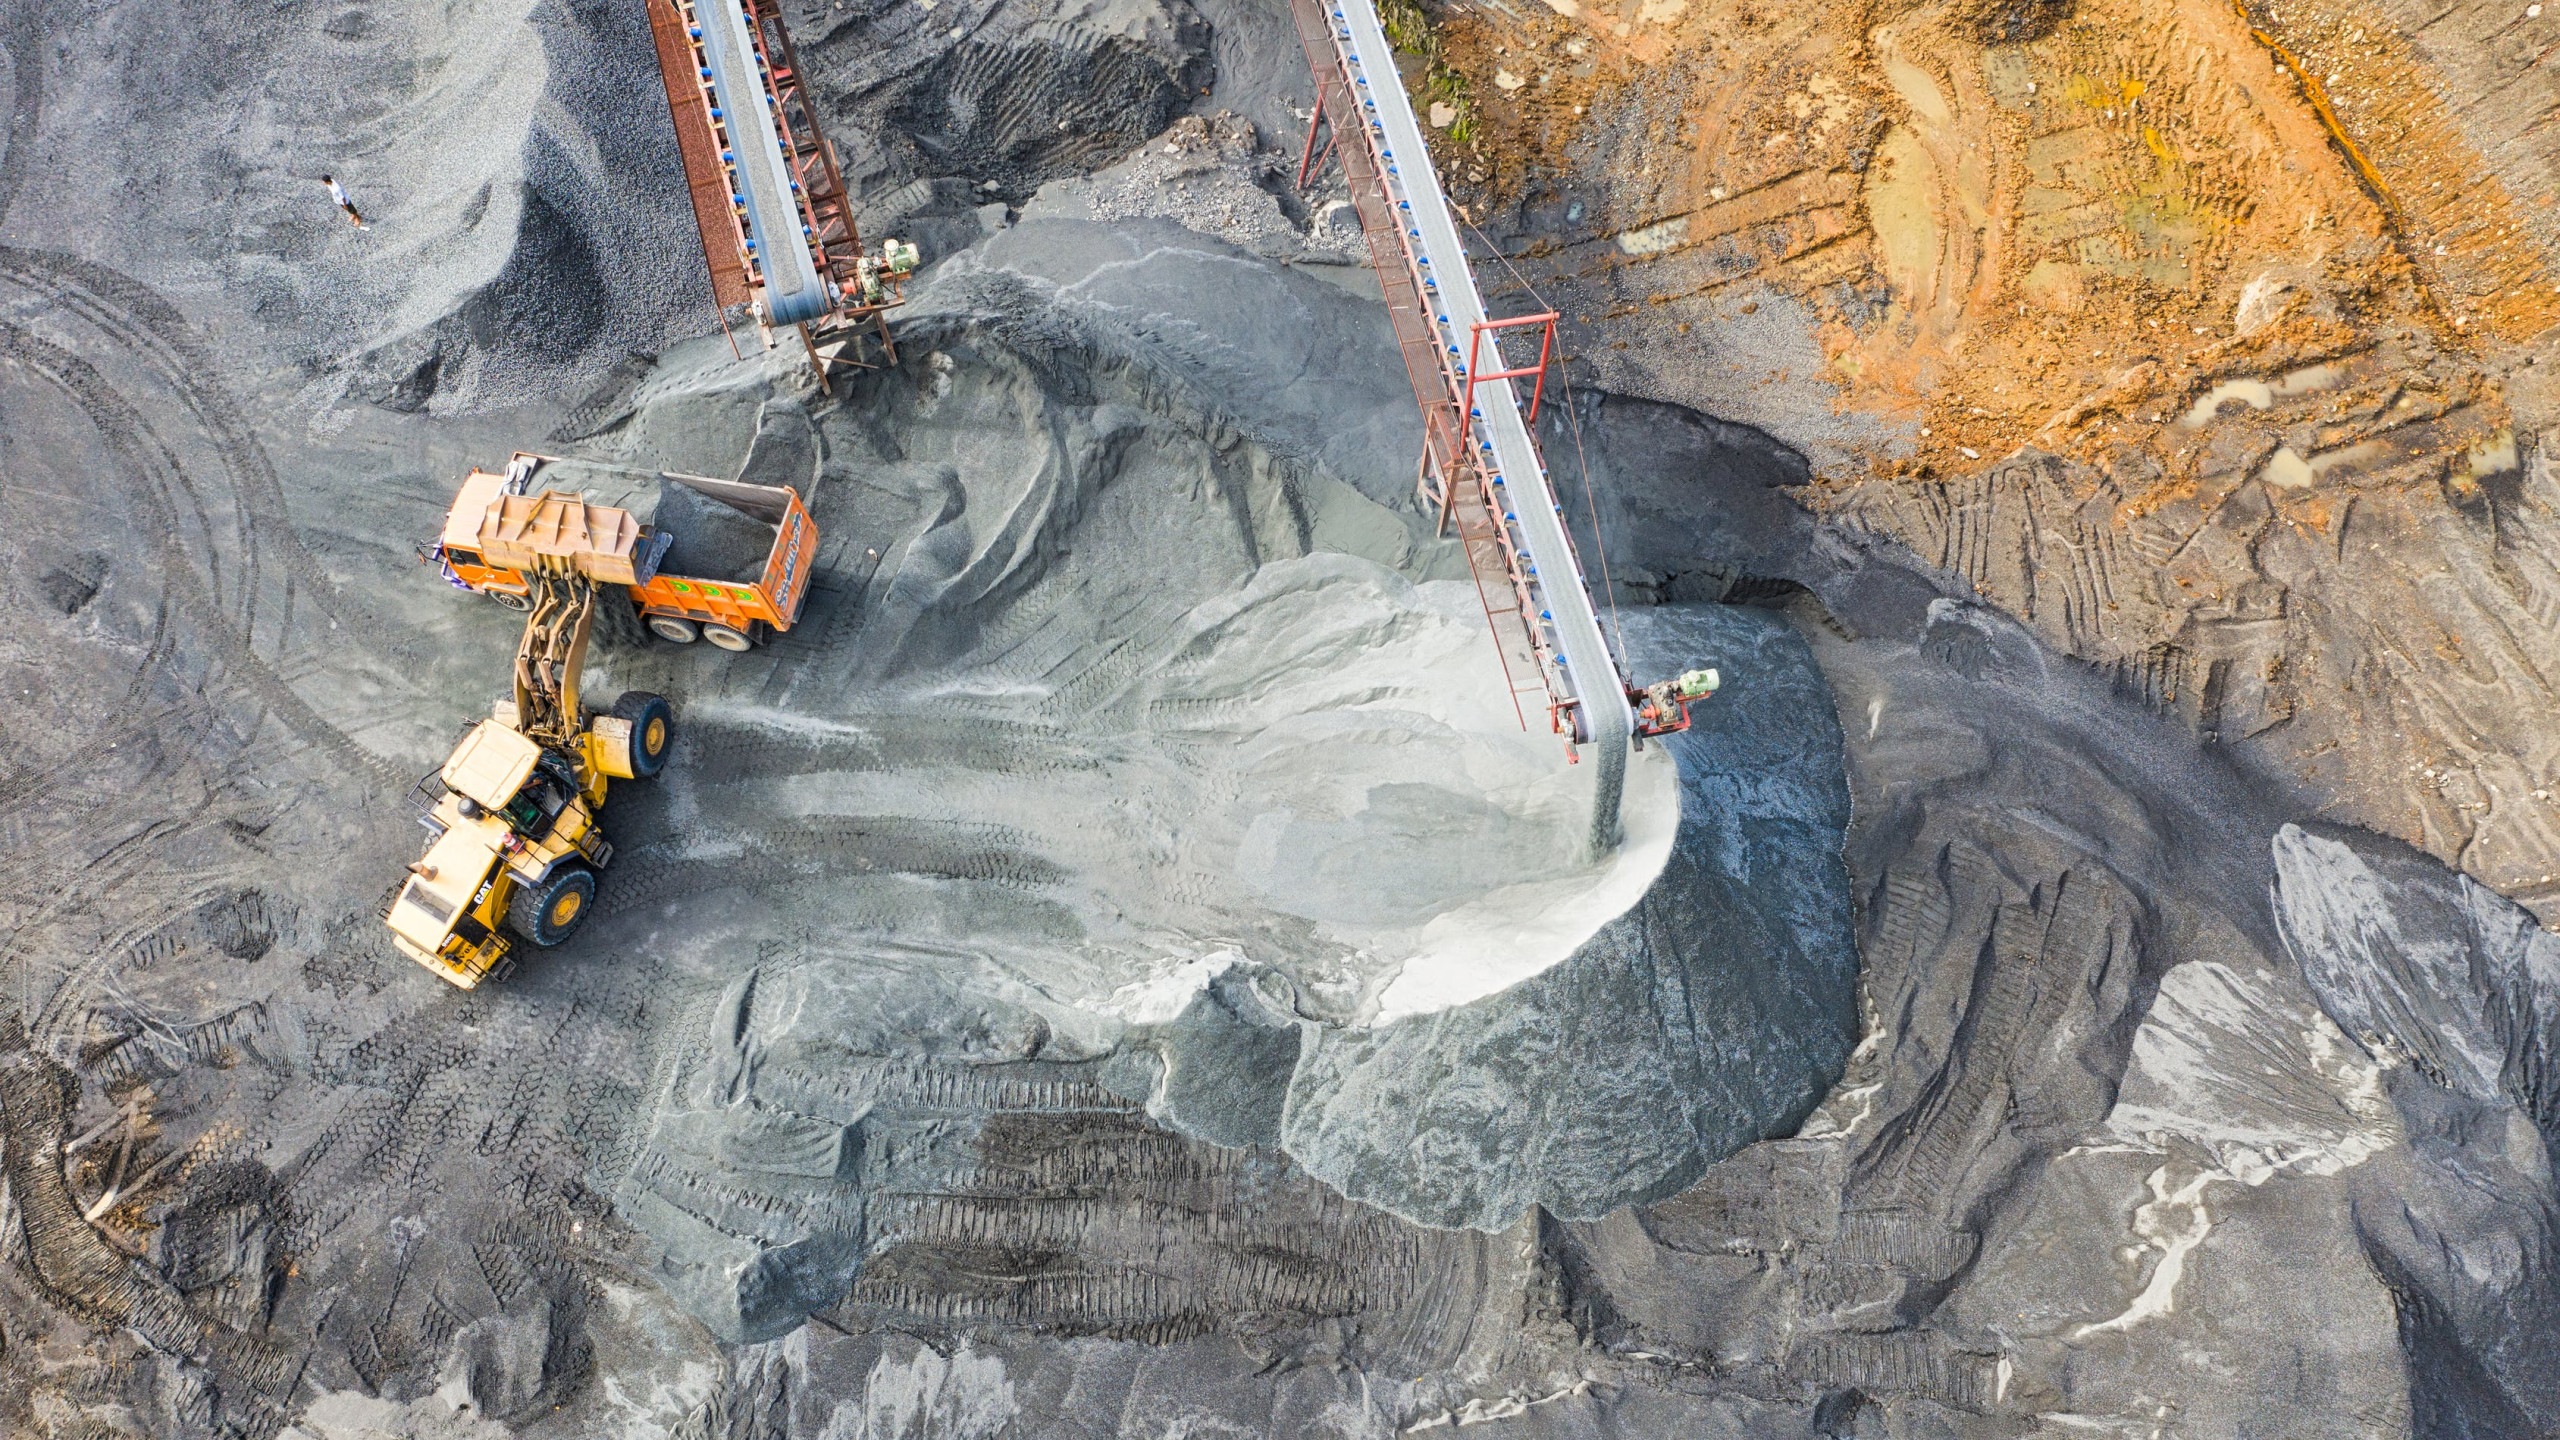 Aerial shot of an open sky mining operation.